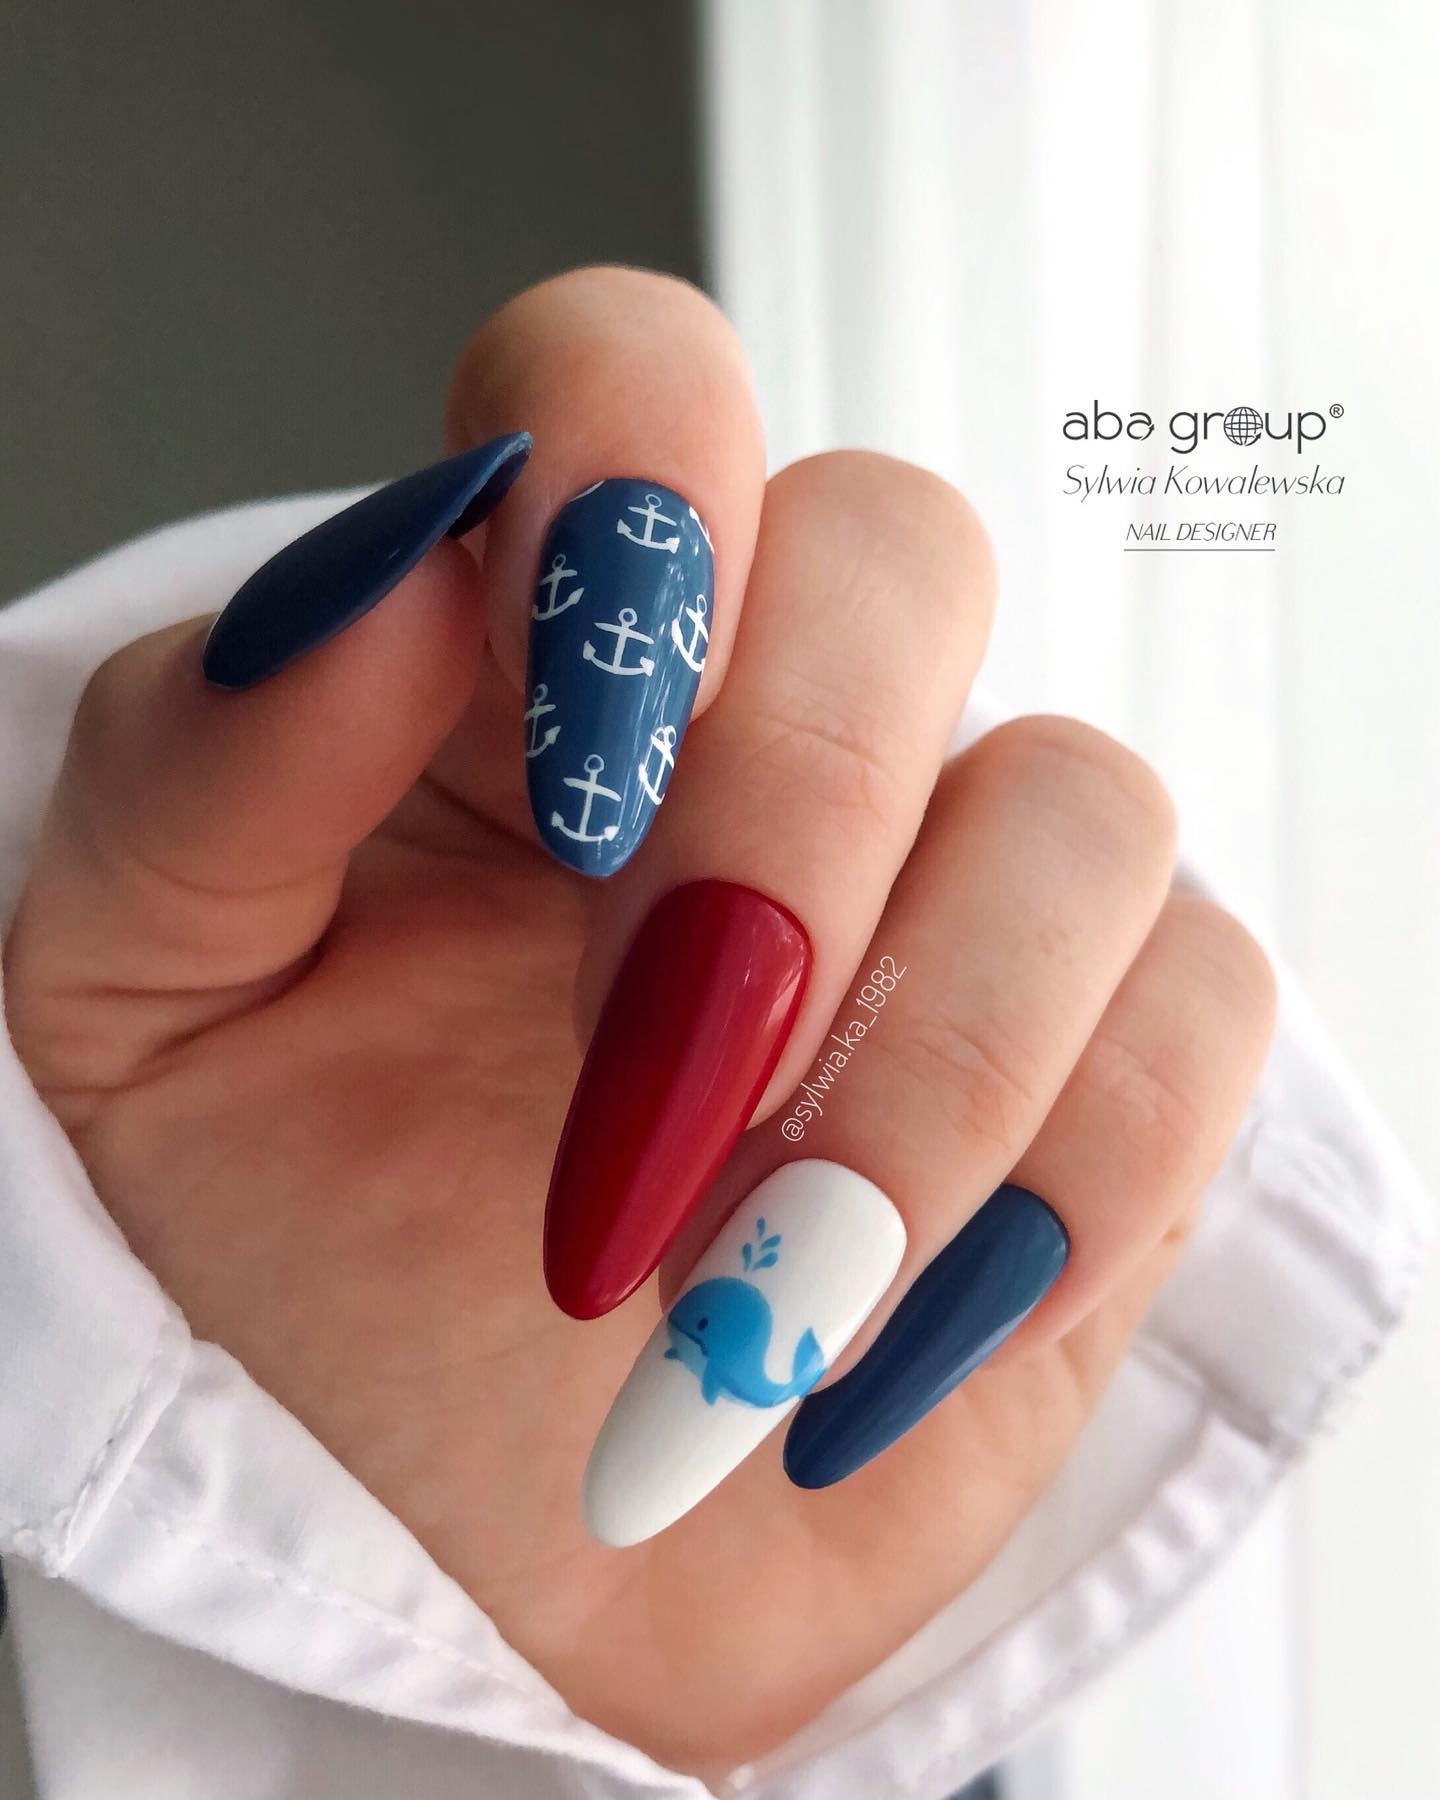 Red and Blue Nails with White Design